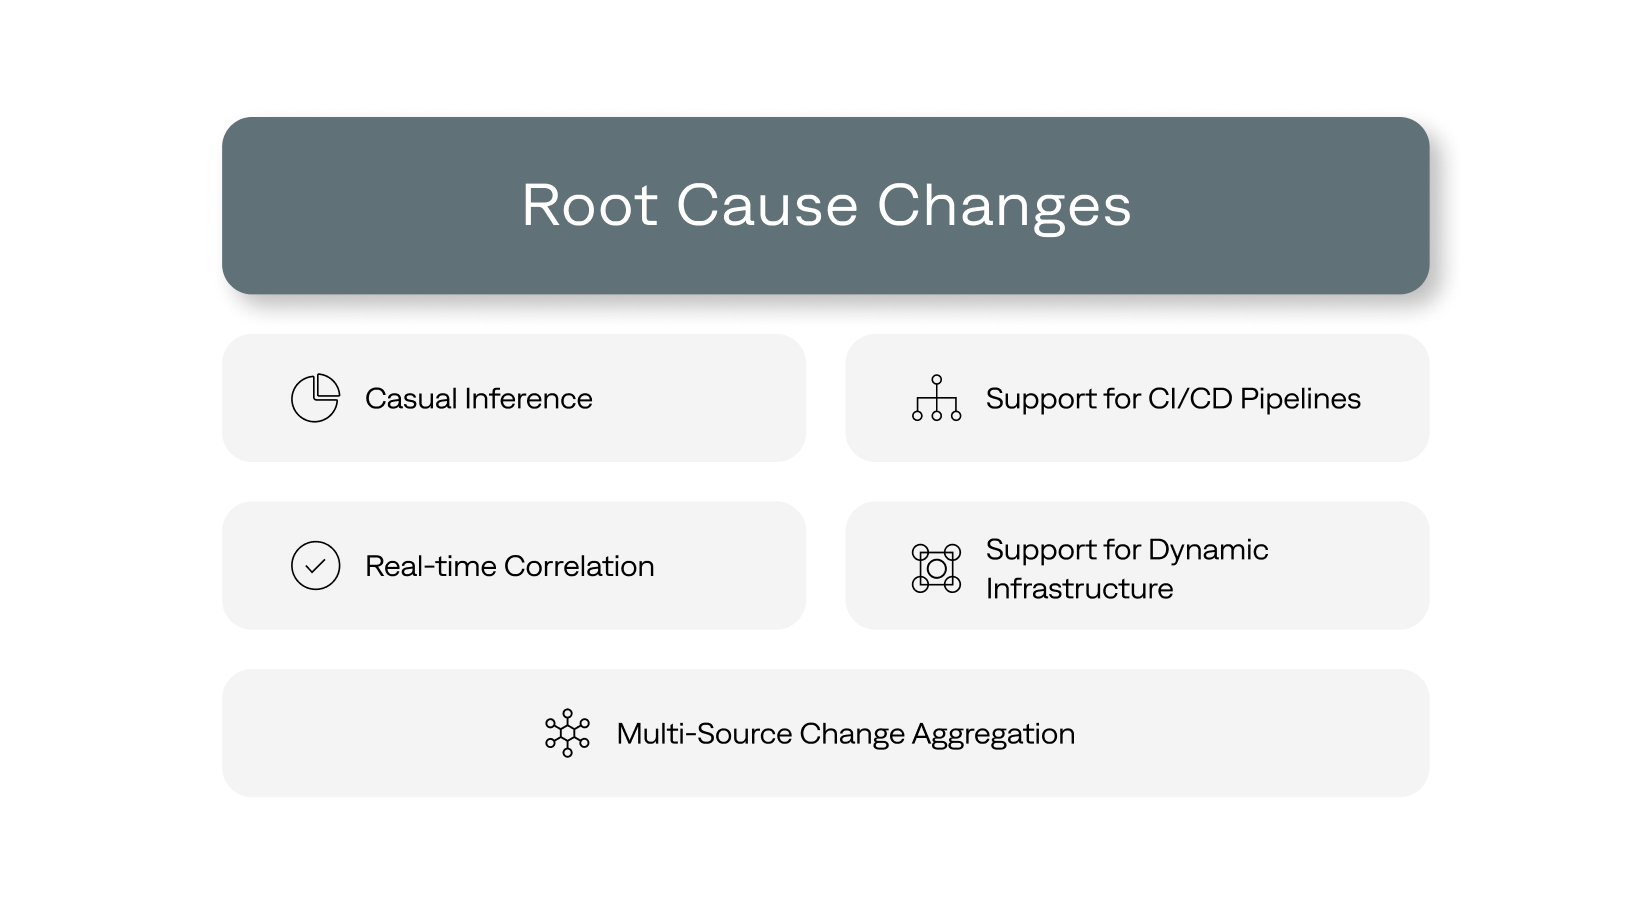 List of potential root-case changes including causal inference, support for CI/CD, and real-time correlation.